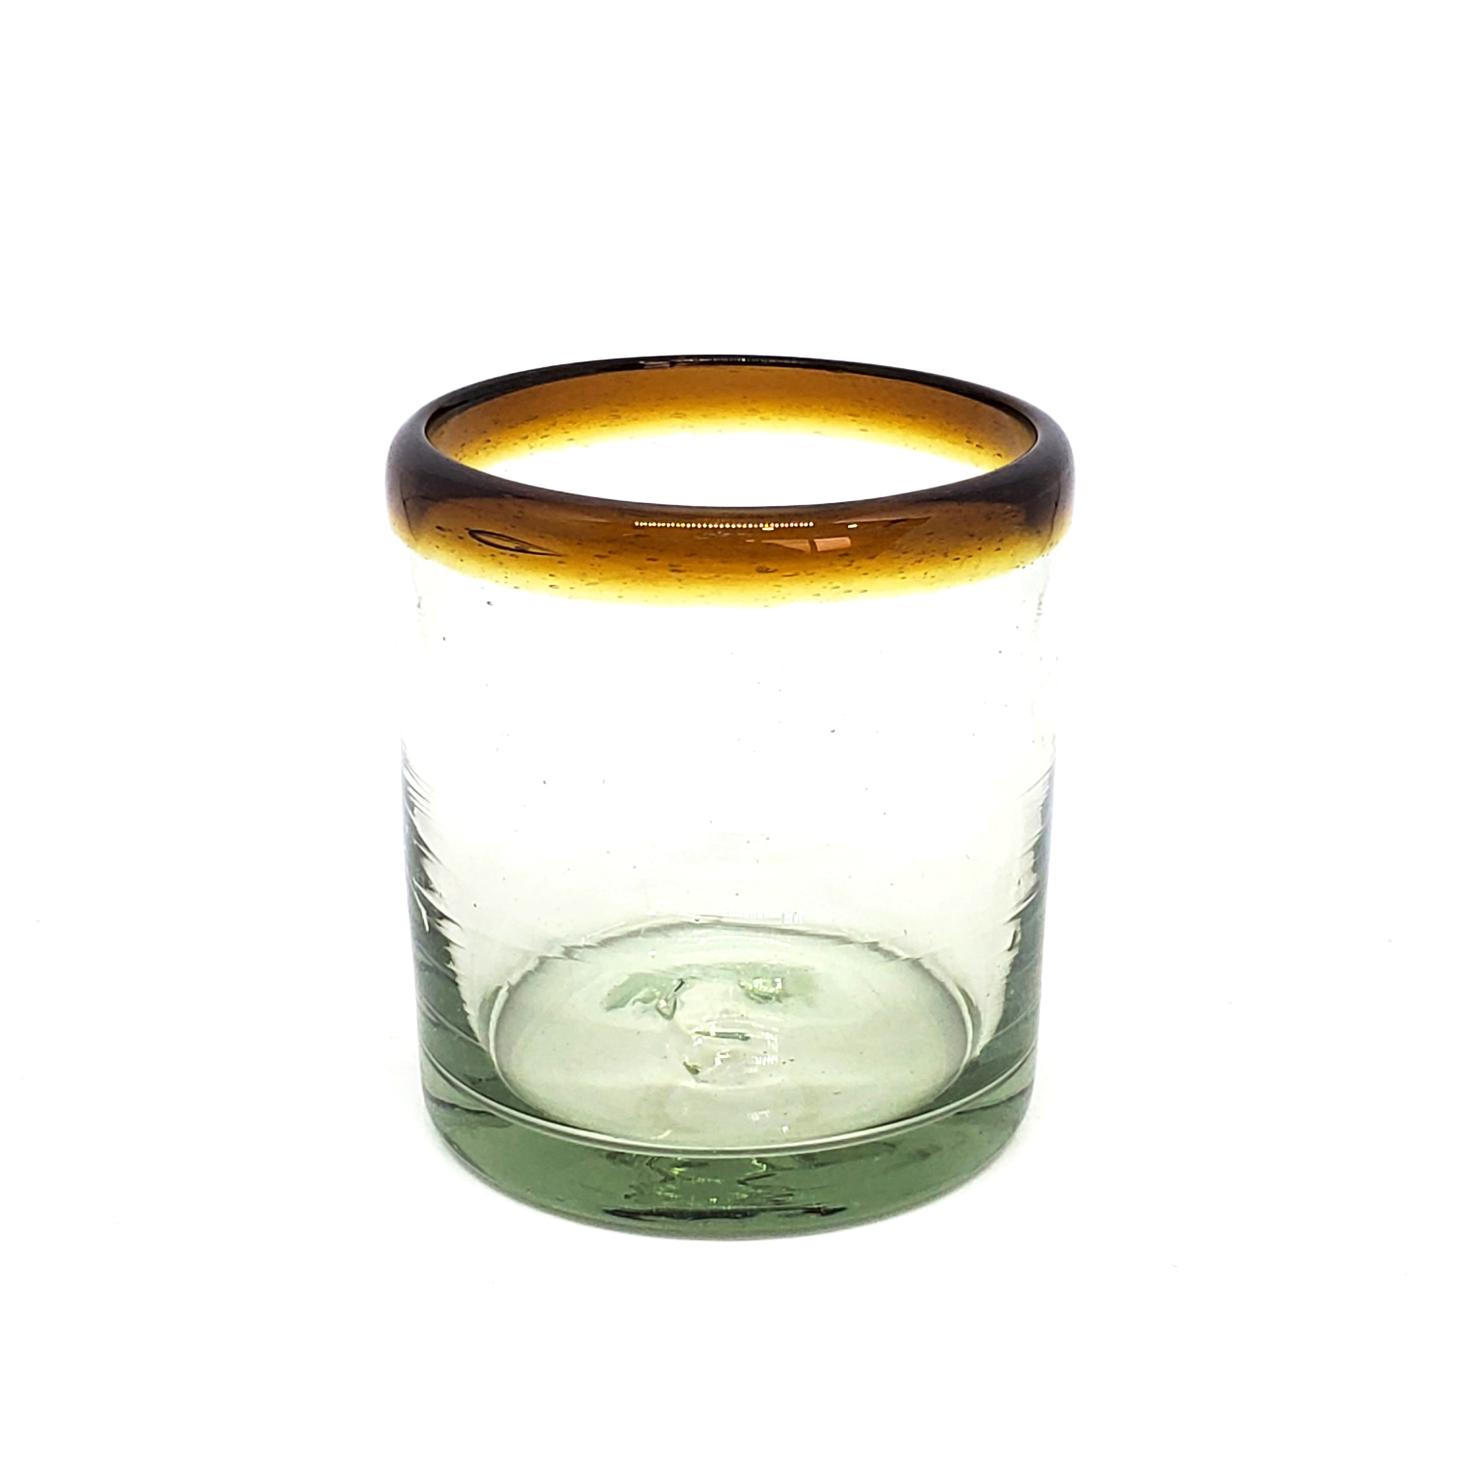 Wholesale Colored Rim Glassware / Amber Rim 8 oz DOF Rock Glasses  / These Double Old Fashioned glasses deliver a classic touch to your favorite drink on the rocks.